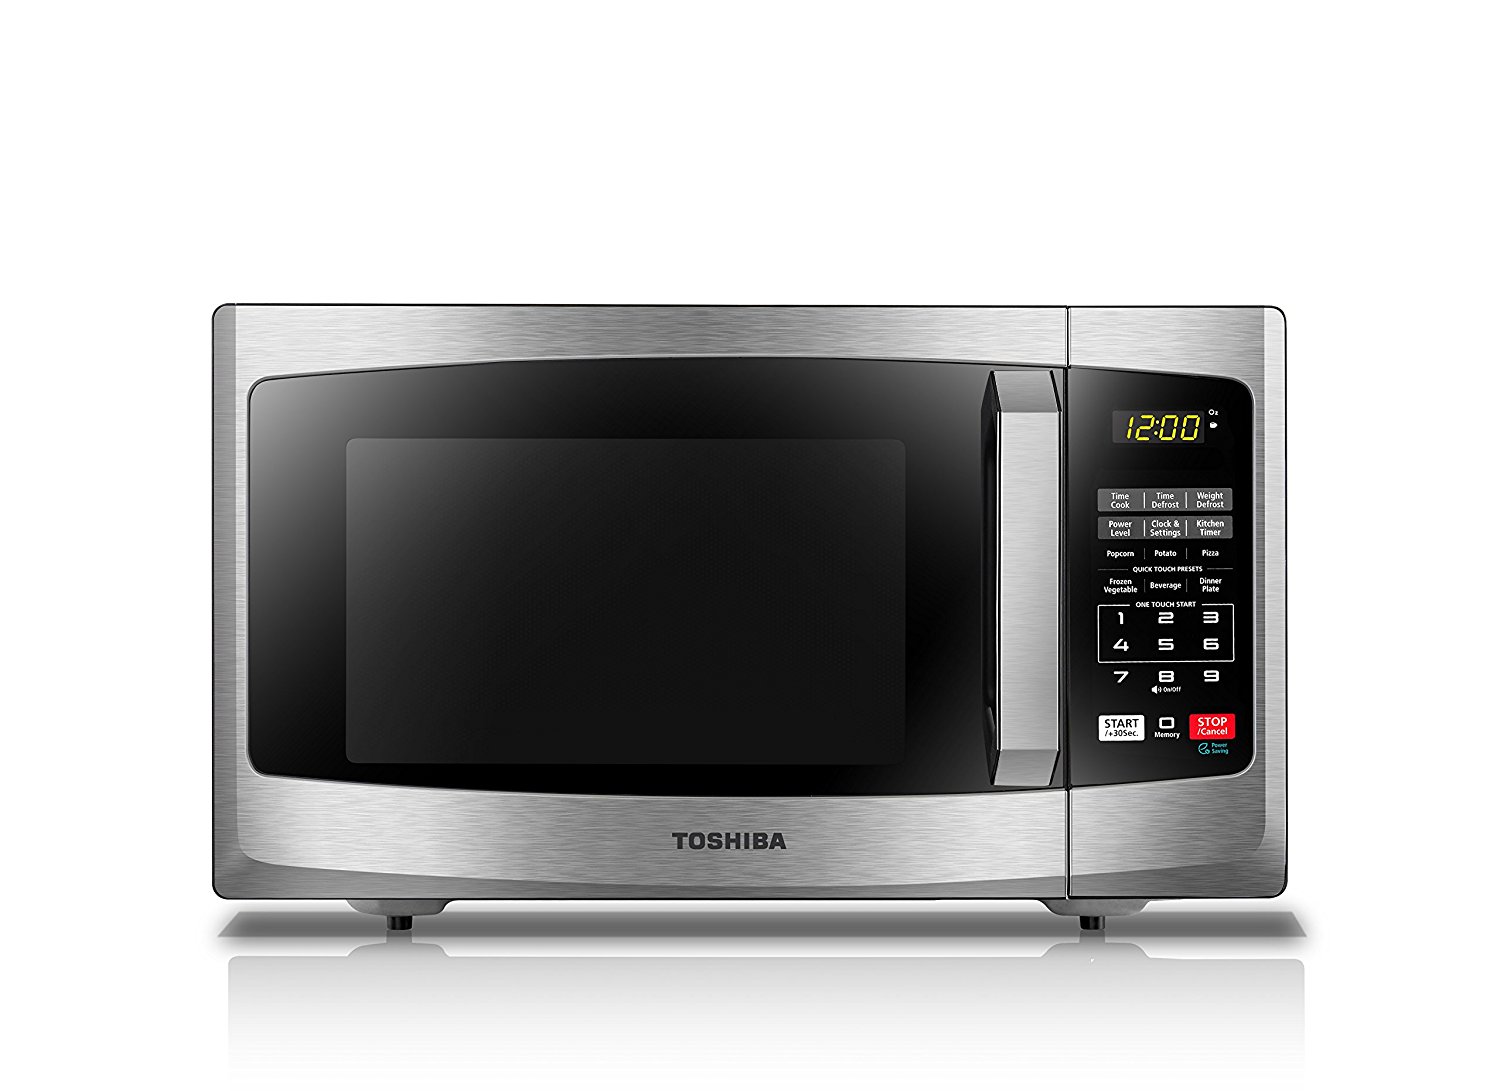 Toshiba 0.9 Cu. ft. Microwave, Stainless Steel, EM925A5A-CHSS - image 1 of 10